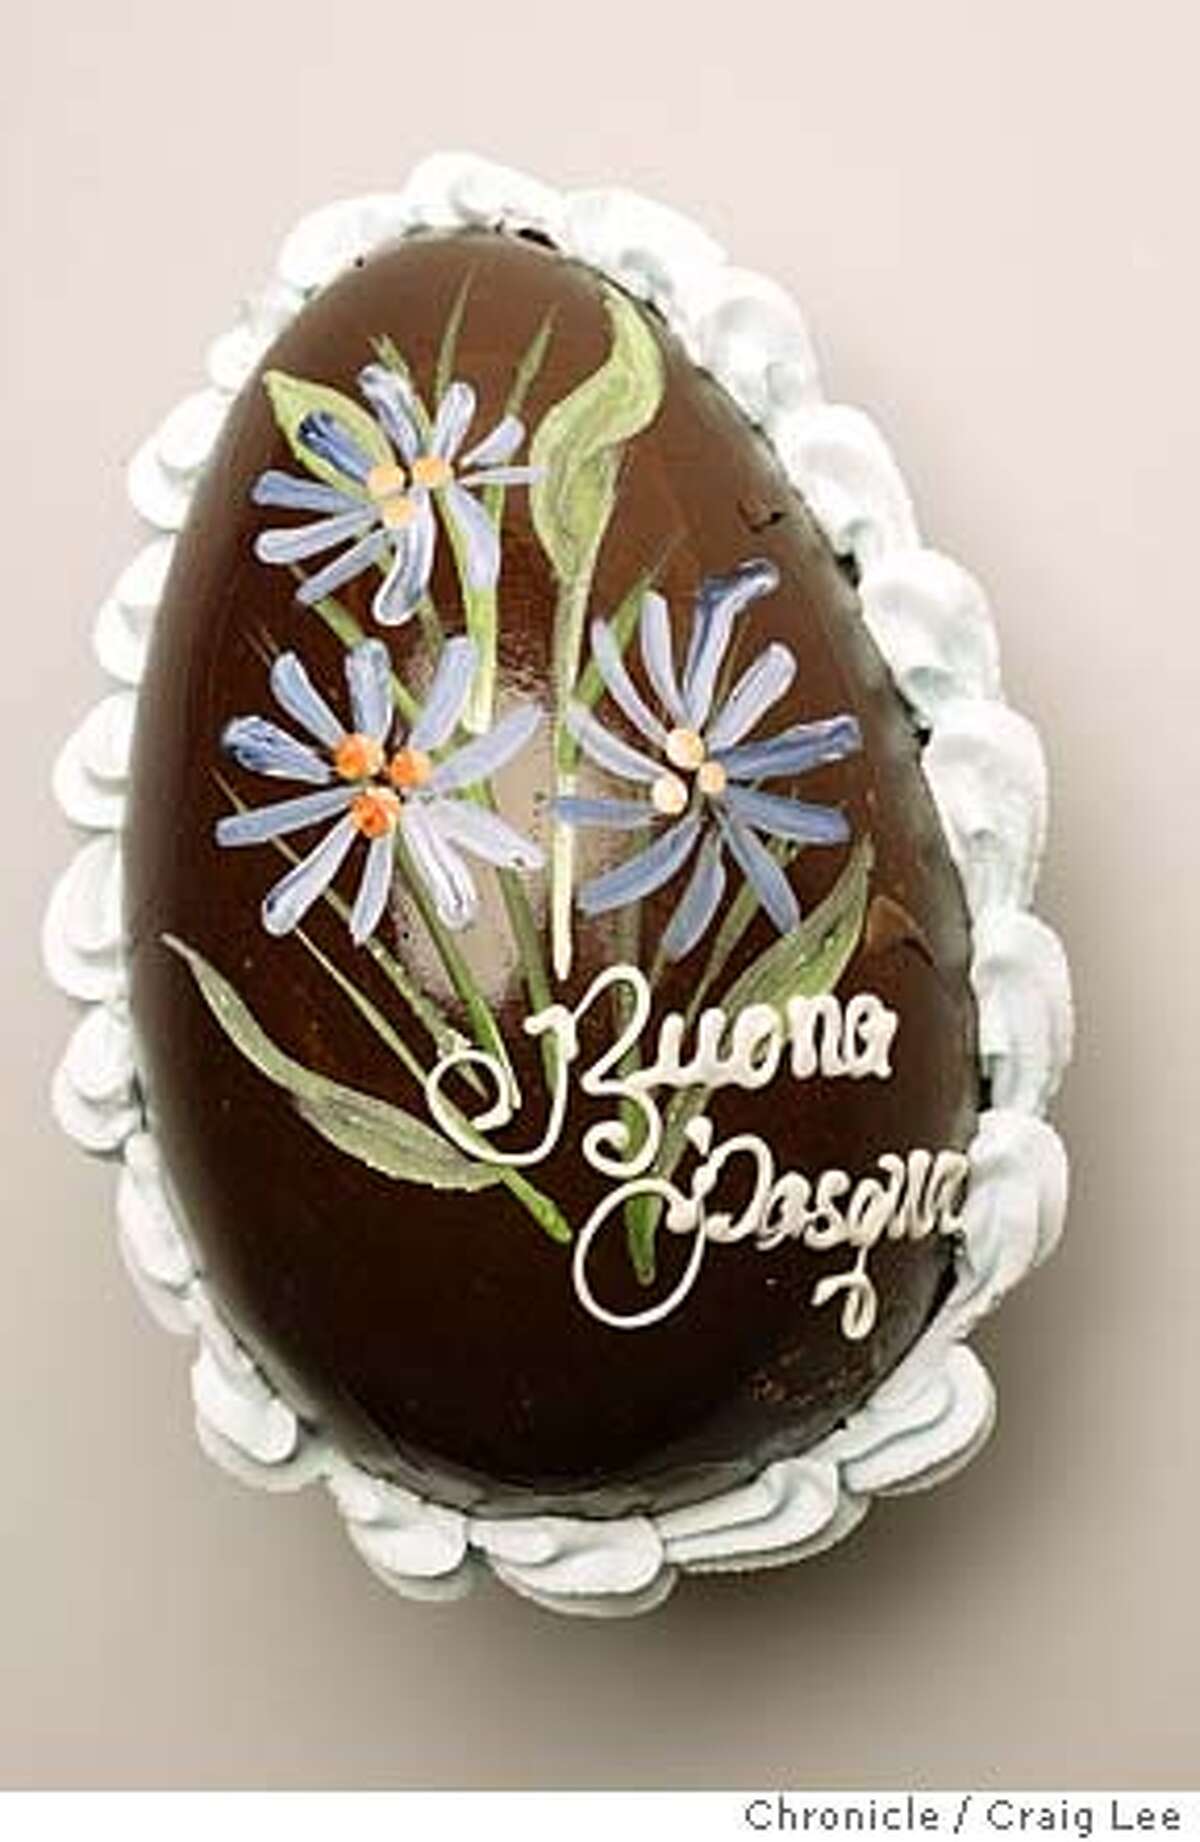 Photo of a chocolate Easter egg from Victoria Pastry Company. What's new column on local chocolate companies that are doing hand-painted chocolate Easter eggs or truffles. Event on 3/18/04 in San Francisco. Craig Lee / The Chronicle